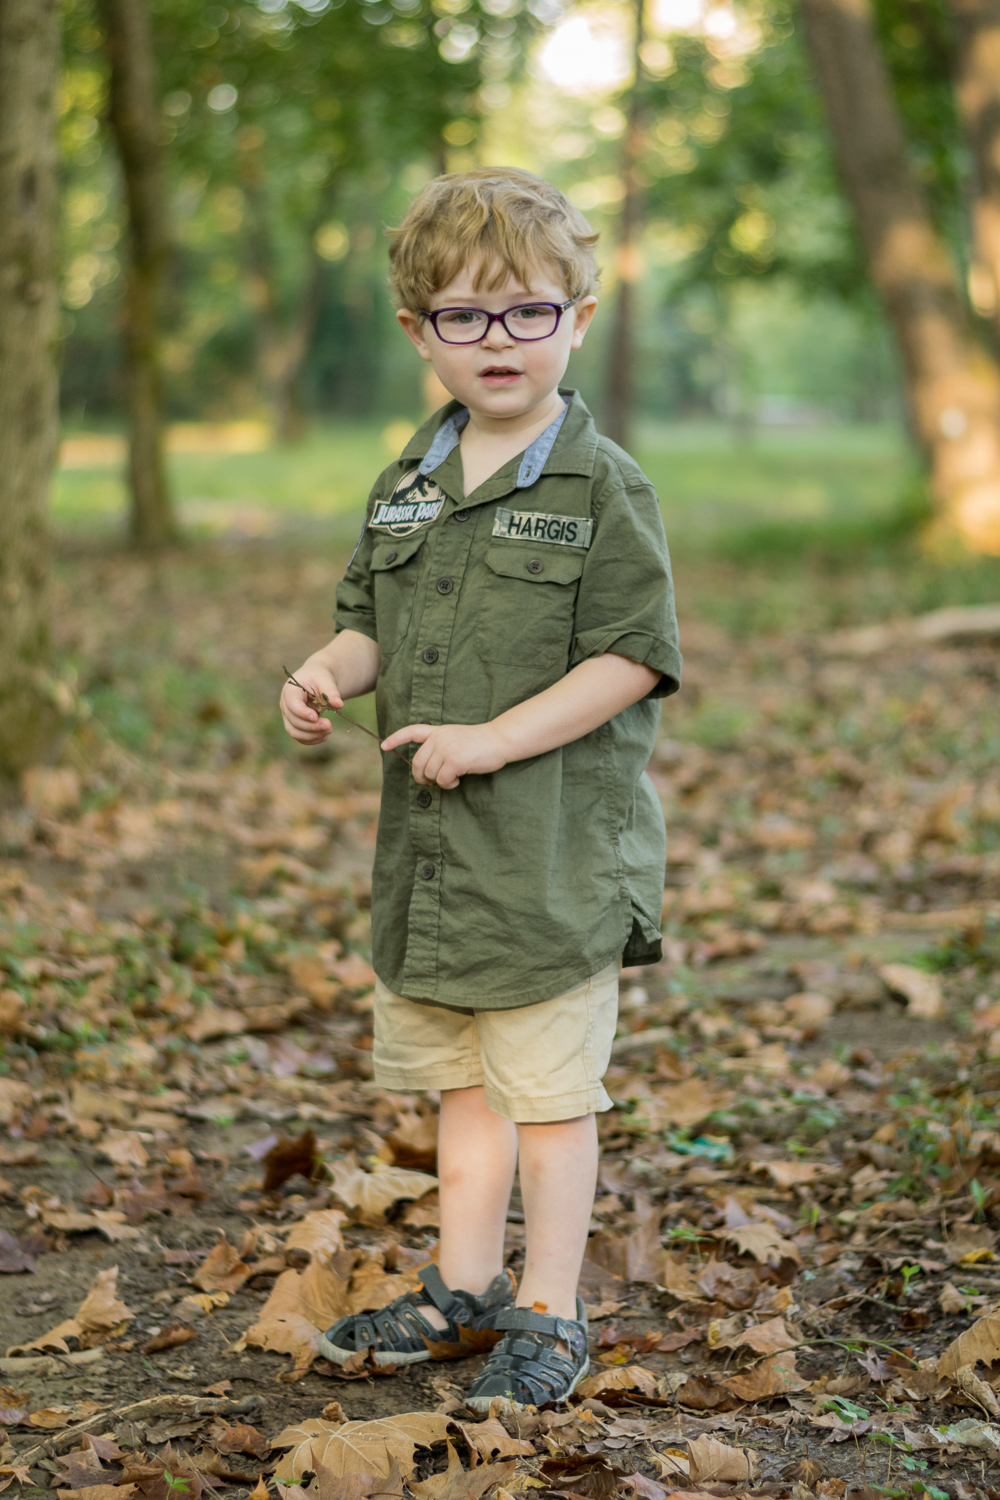 A young boy stands in the forest and holds a stick.